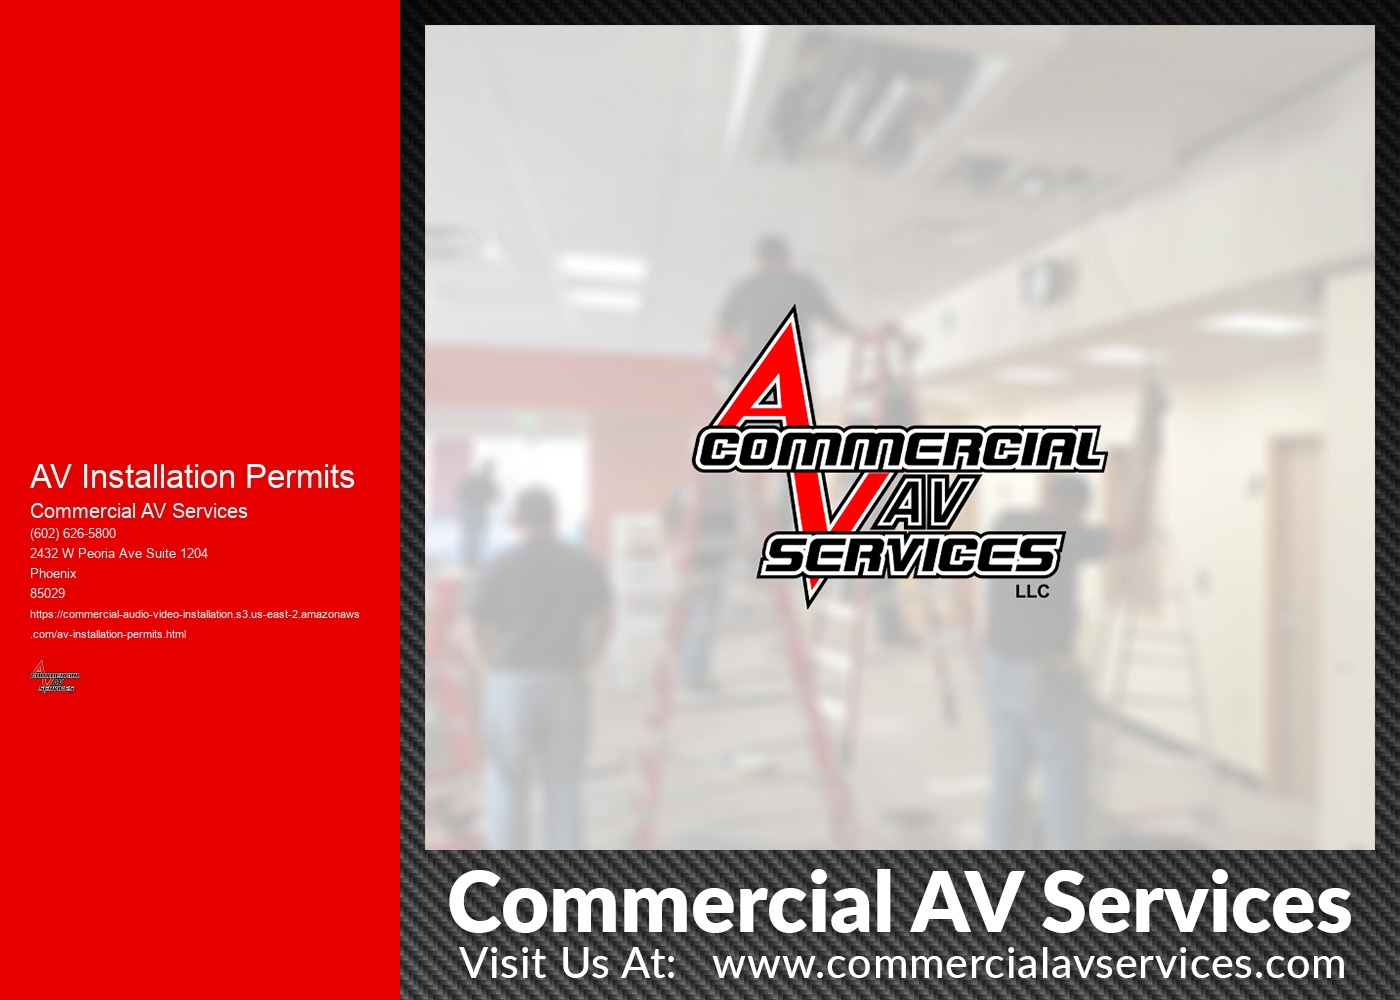 Are there any additional fees associated with obtaining AV installation permits?